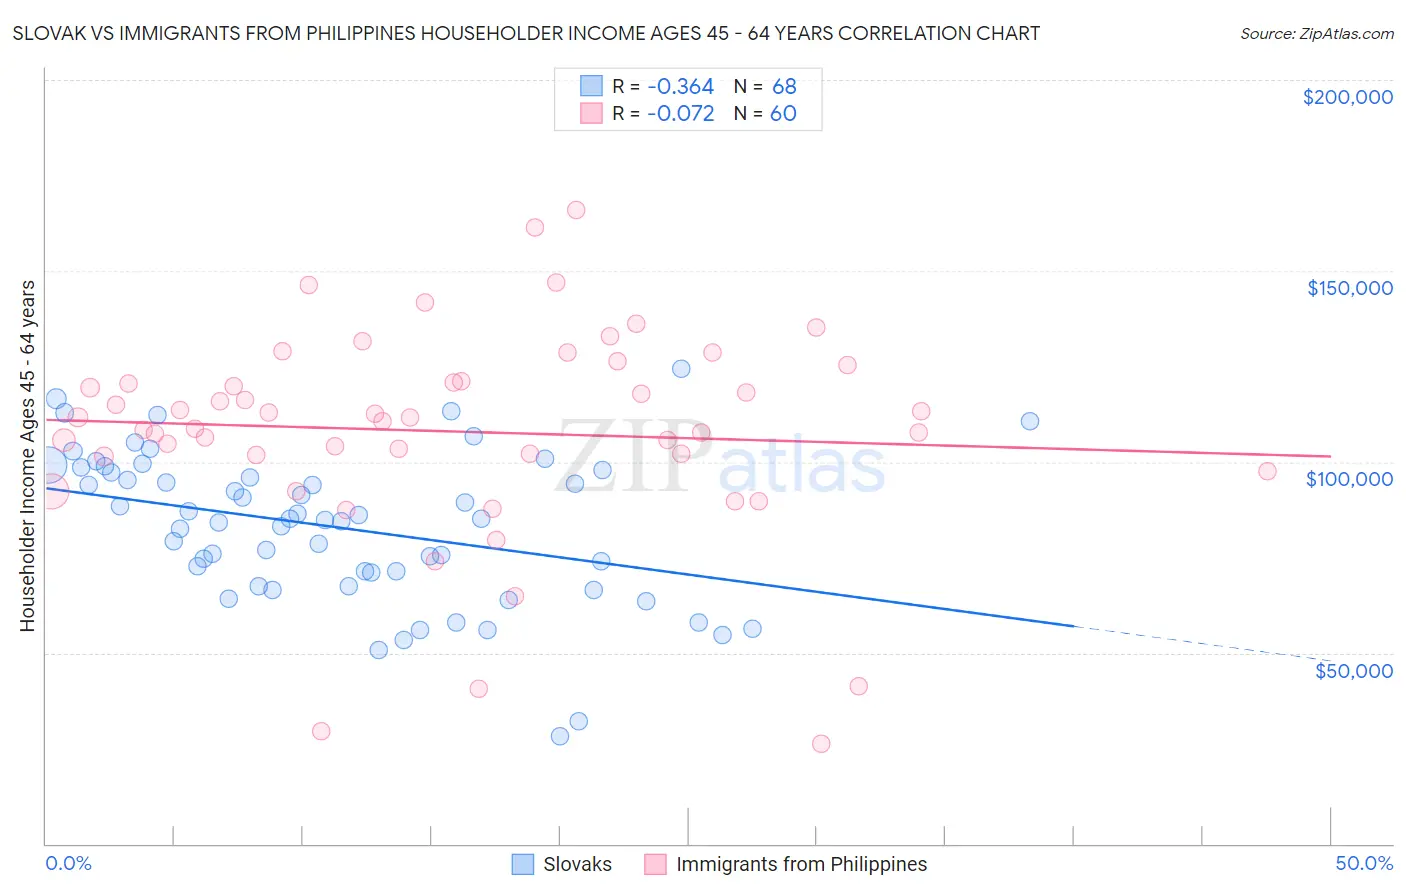 Slovak vs Immigrants from Philippines Householder Income Ages 45 - 64 years